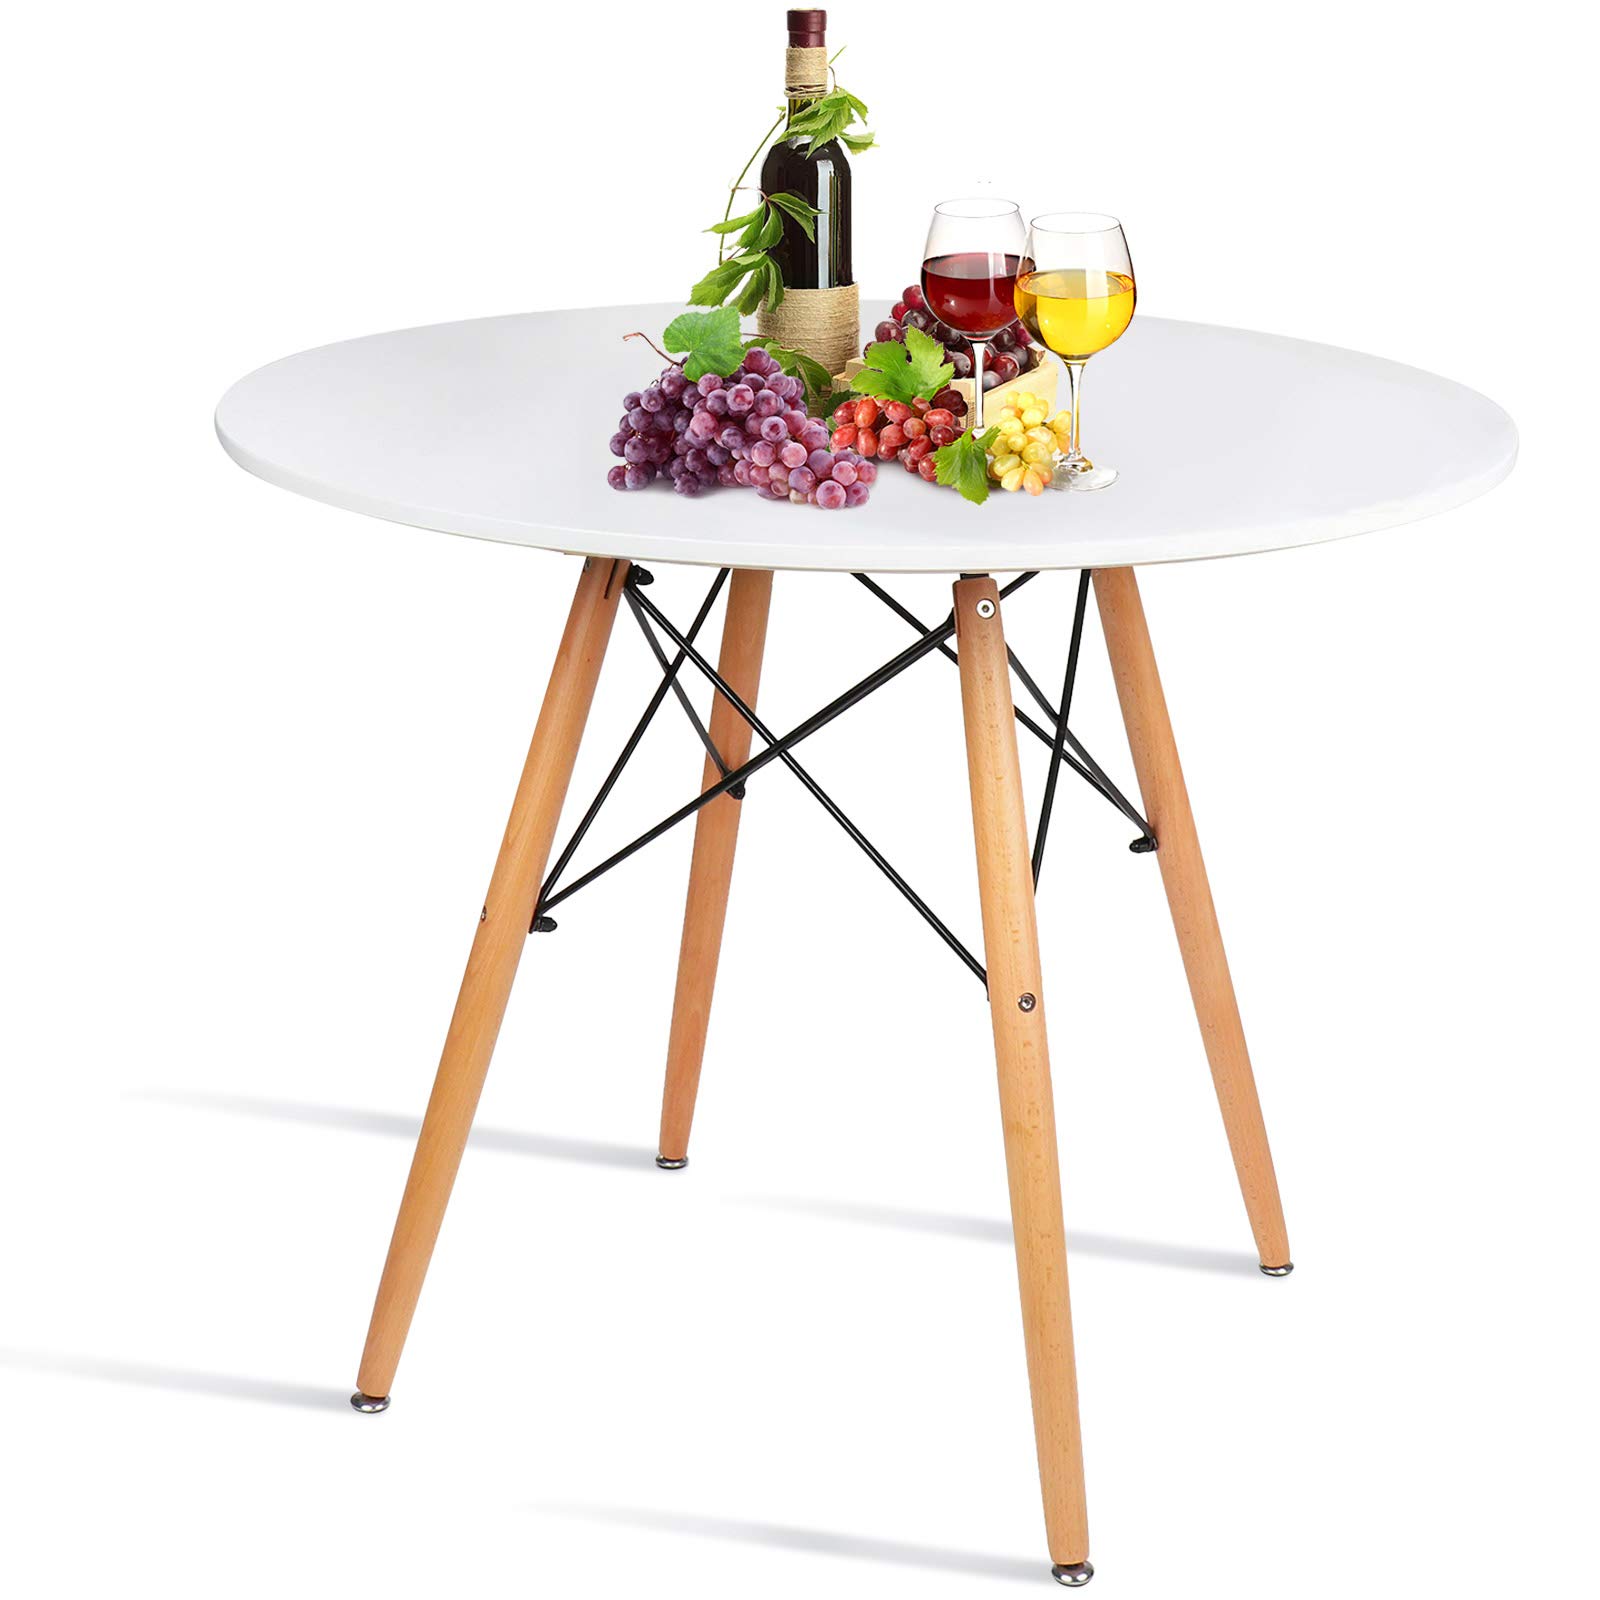 Round White Dining Kitchen Table Modern Leisure Table Wooden Legs for Office